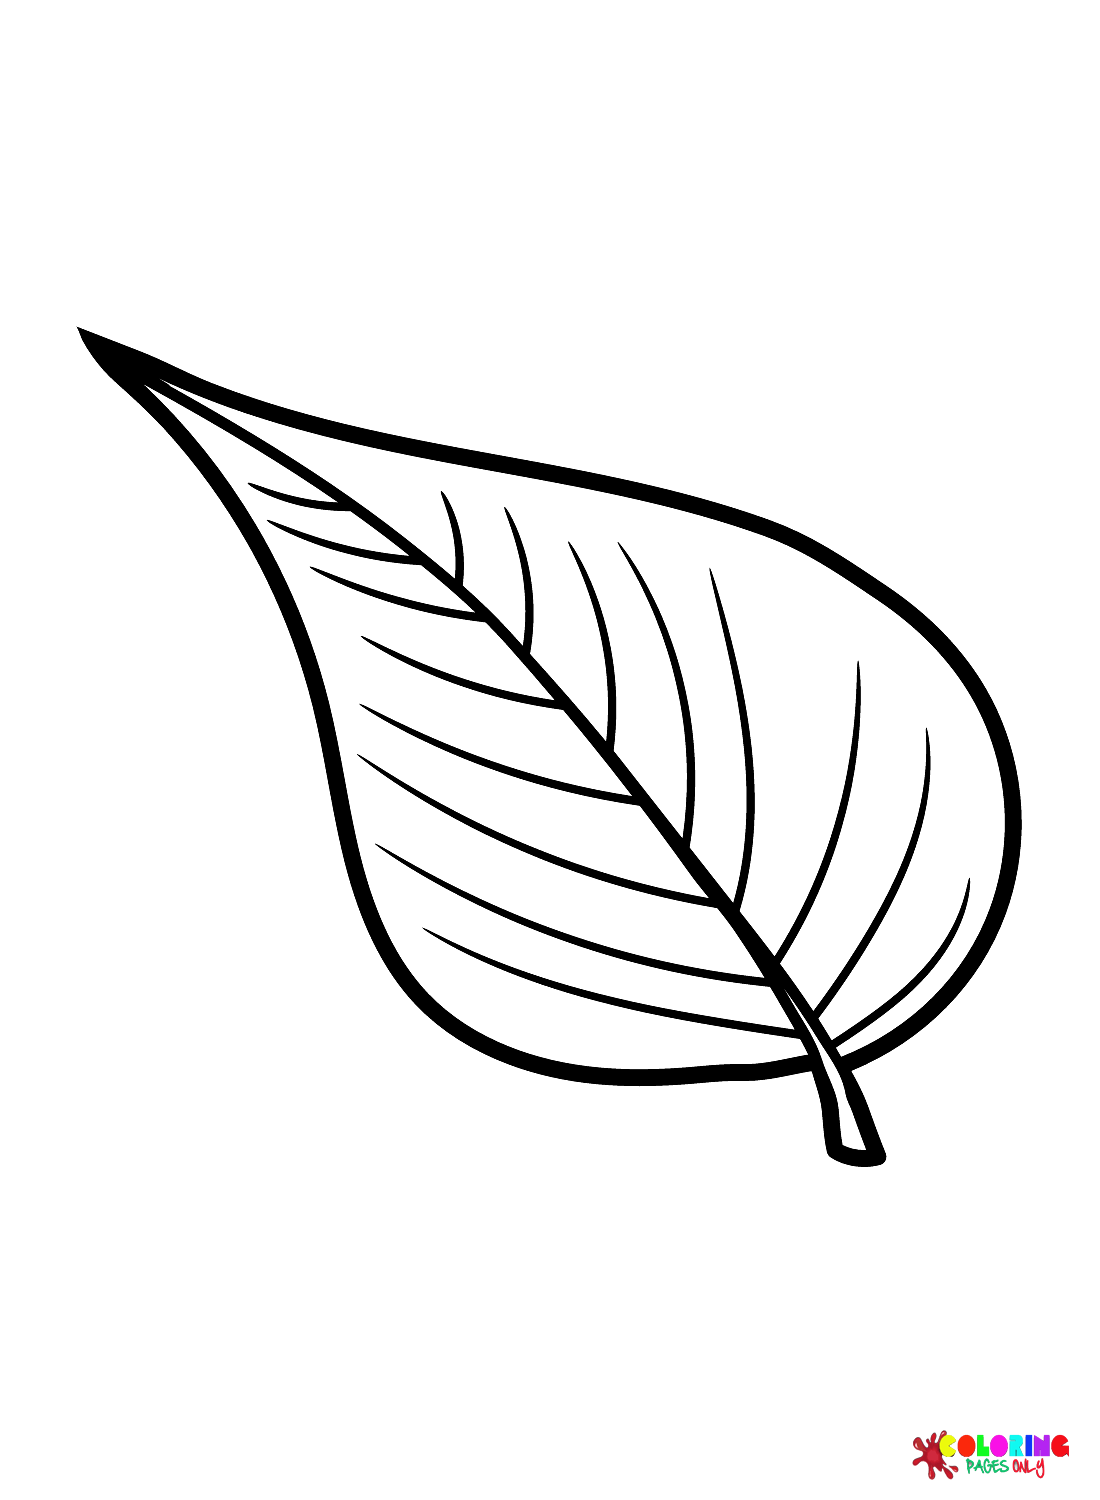 Common Hackberry Leaf from Leaves